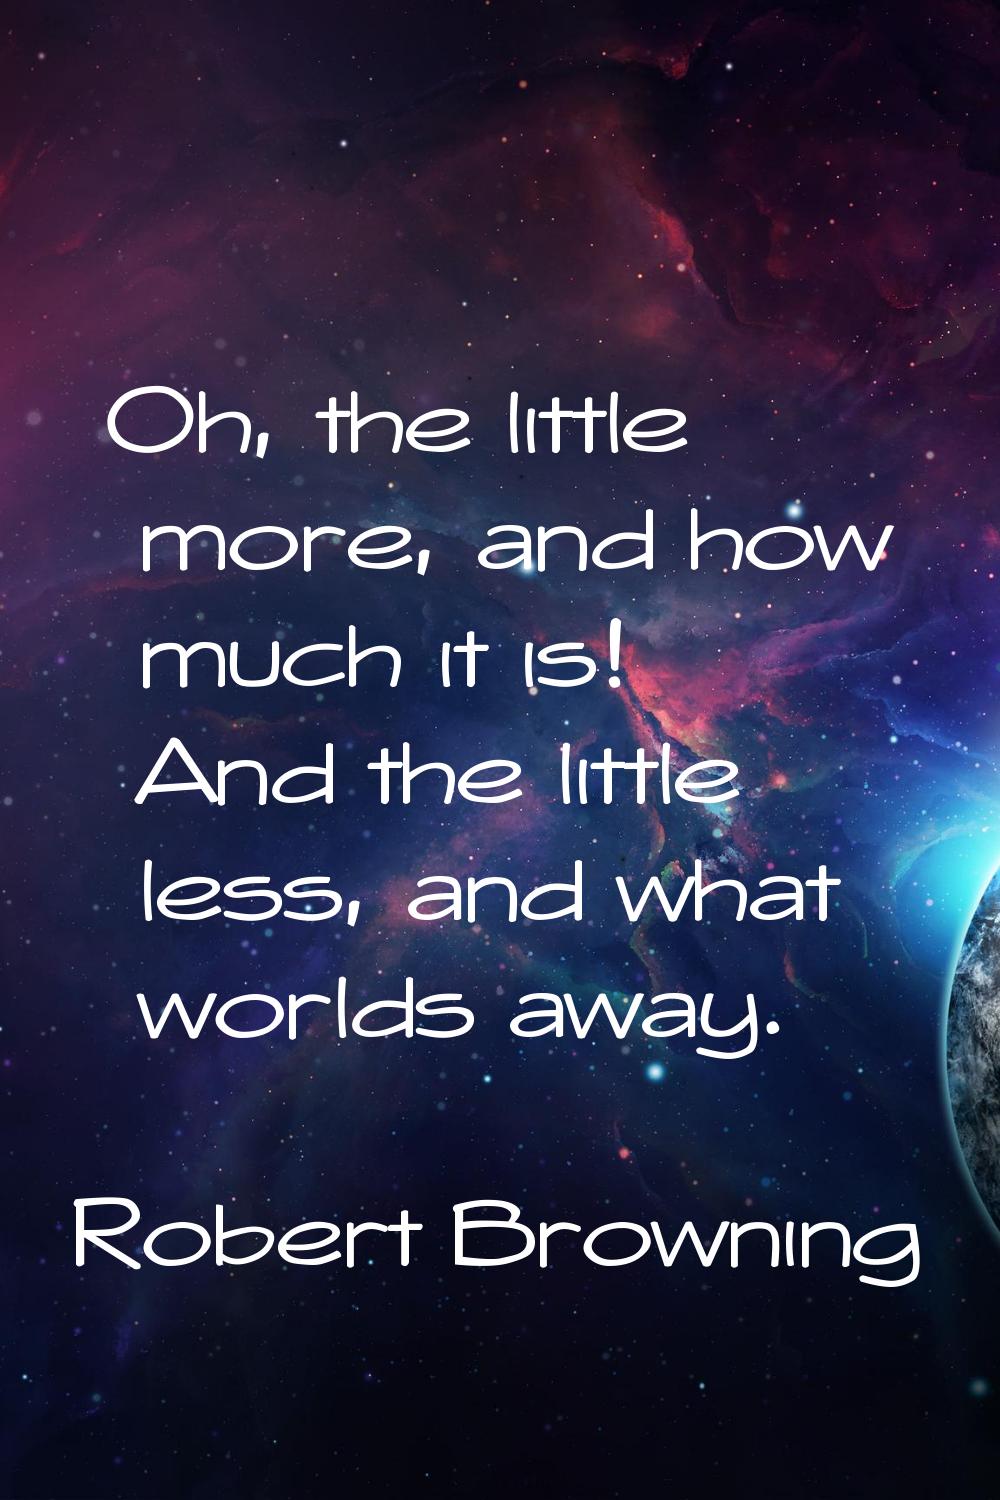 Oh, the little more, and how much it is! And the little less, and what worlds away.